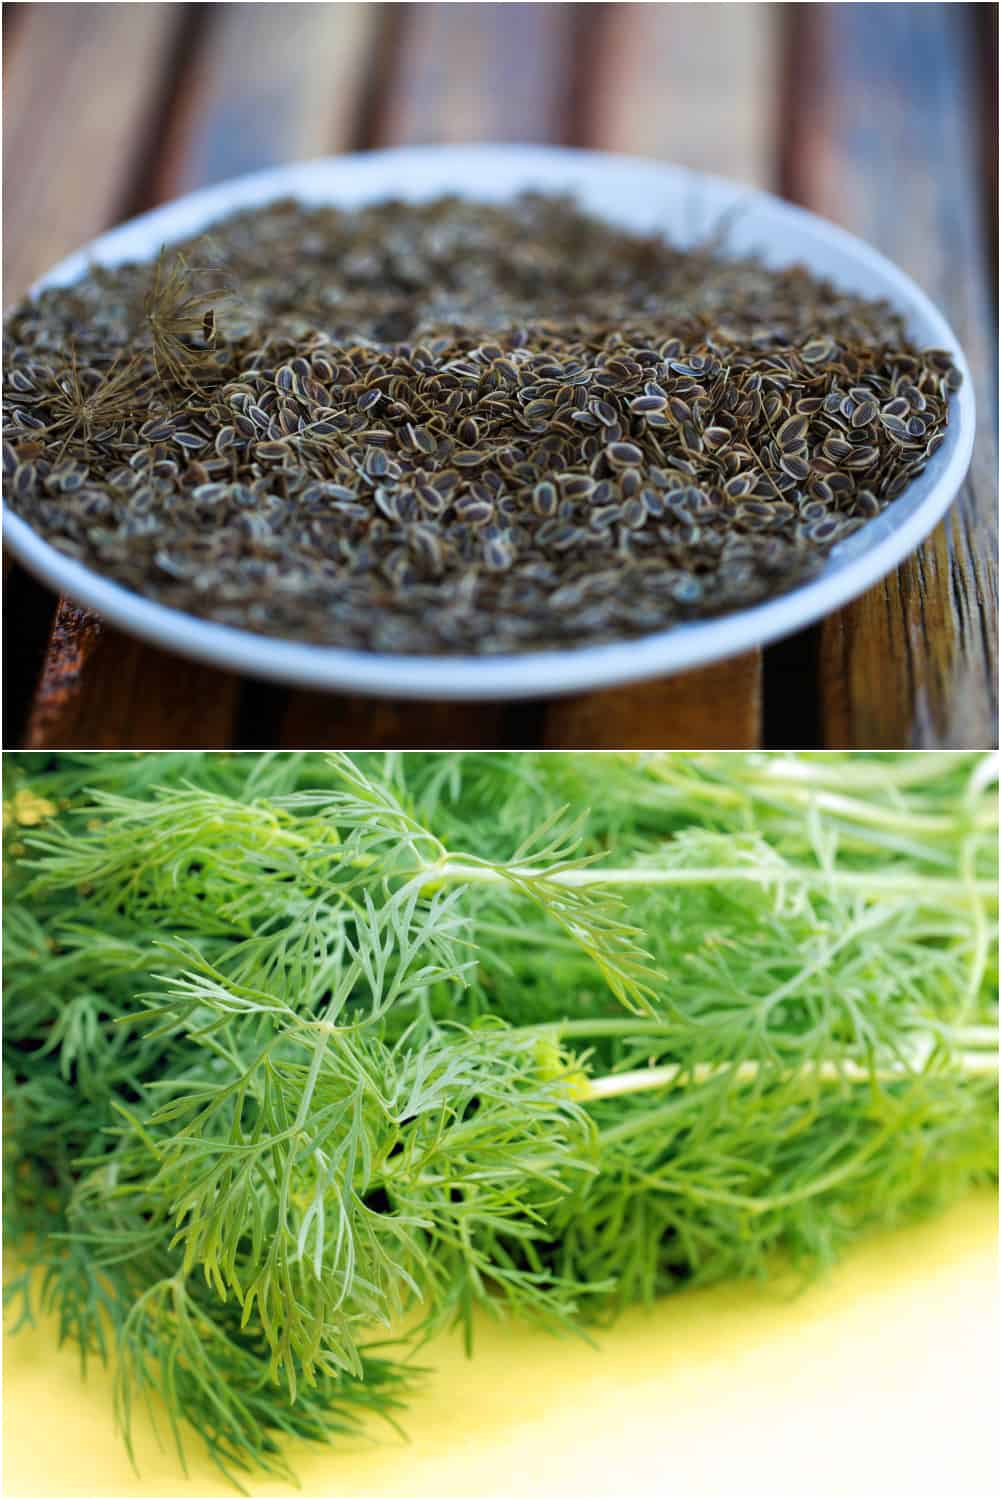 dill weed vs dill seed